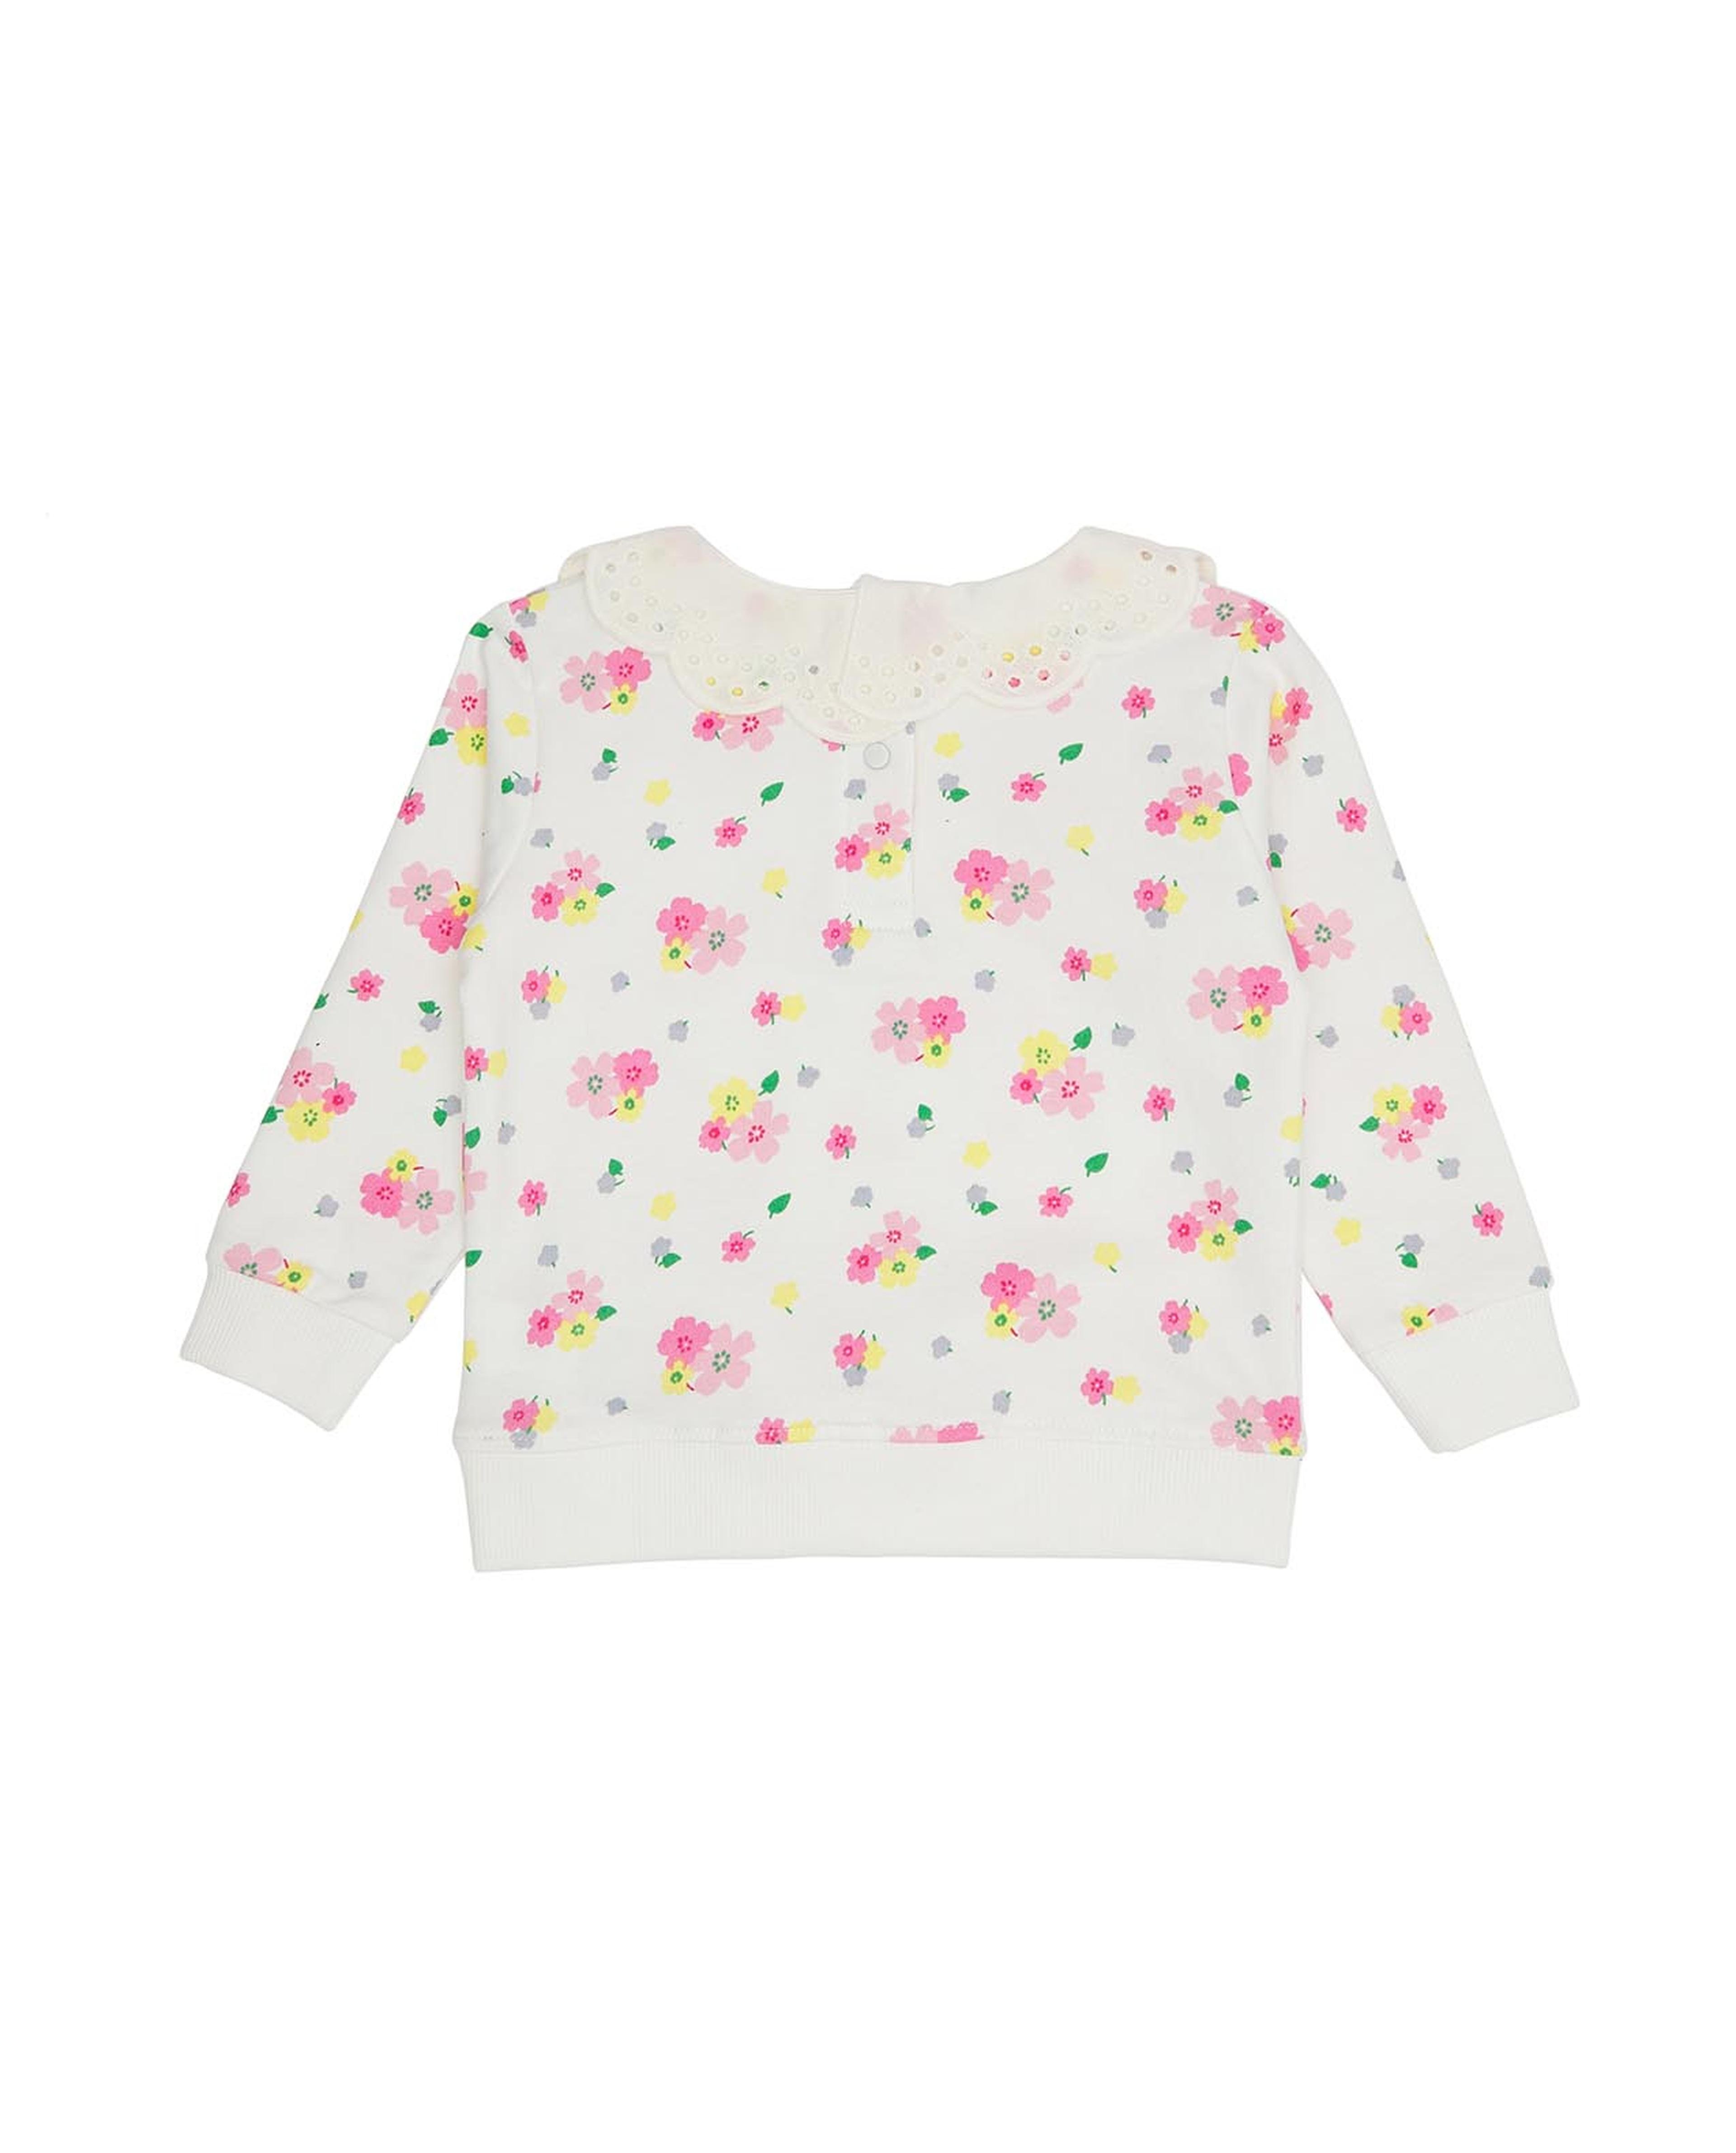 Floral Print Sweatshirt with Peter Pan Collar and Long Sleeves